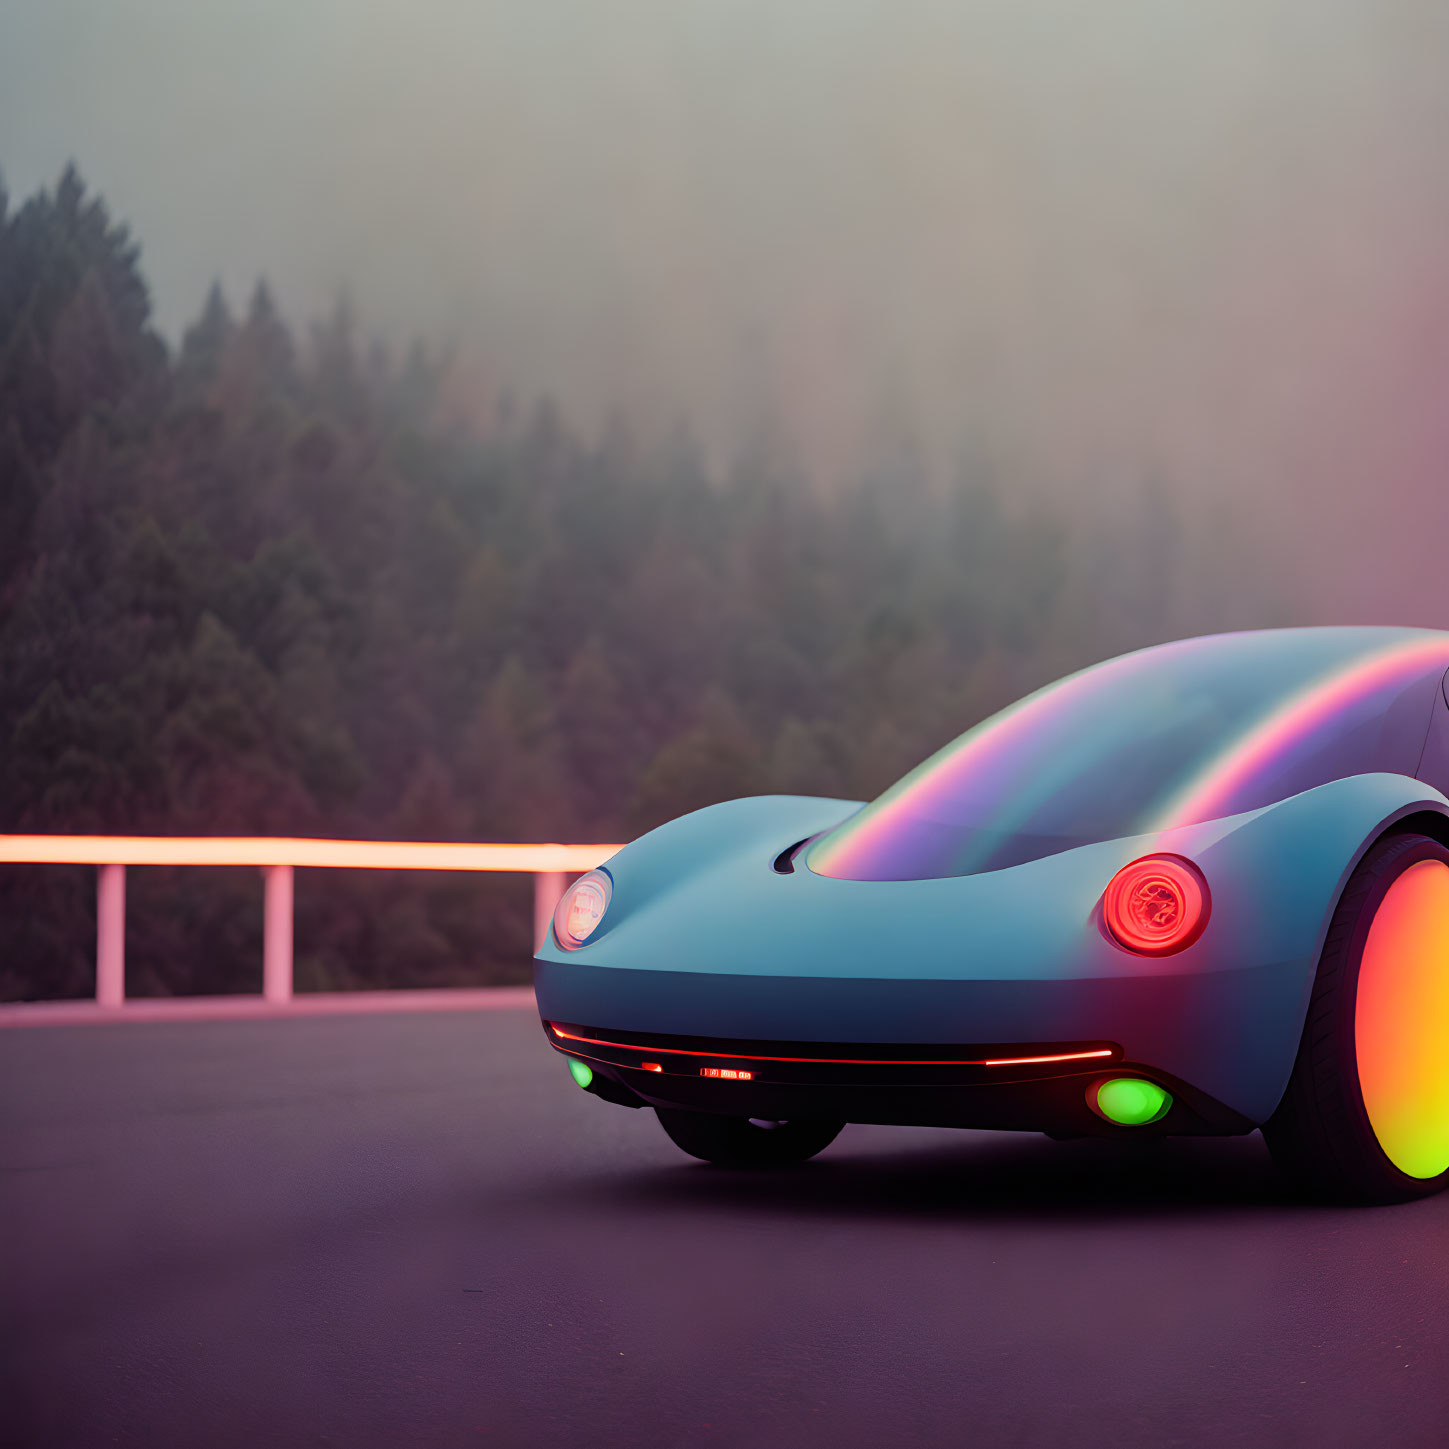 Colorful holographic finish car parked by misty forest